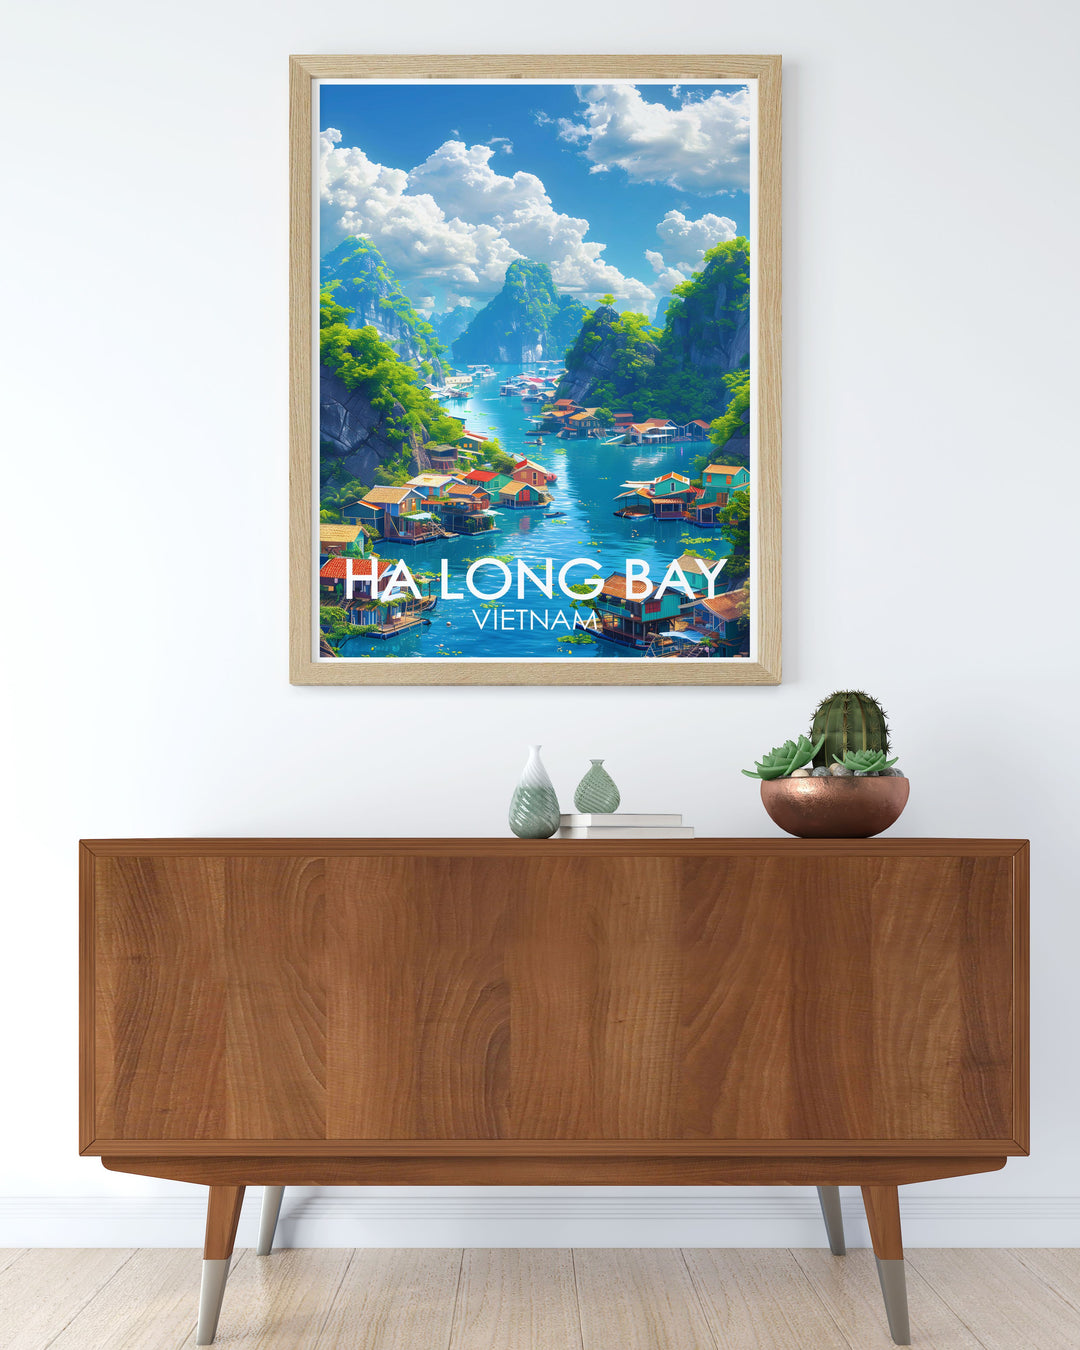 Highlighting the cultural and natural beauty of Ha Long Bay, this travel poster offers a captivating view of Vietnams floating fishing villages, ideal for those who appreciate scenic art.